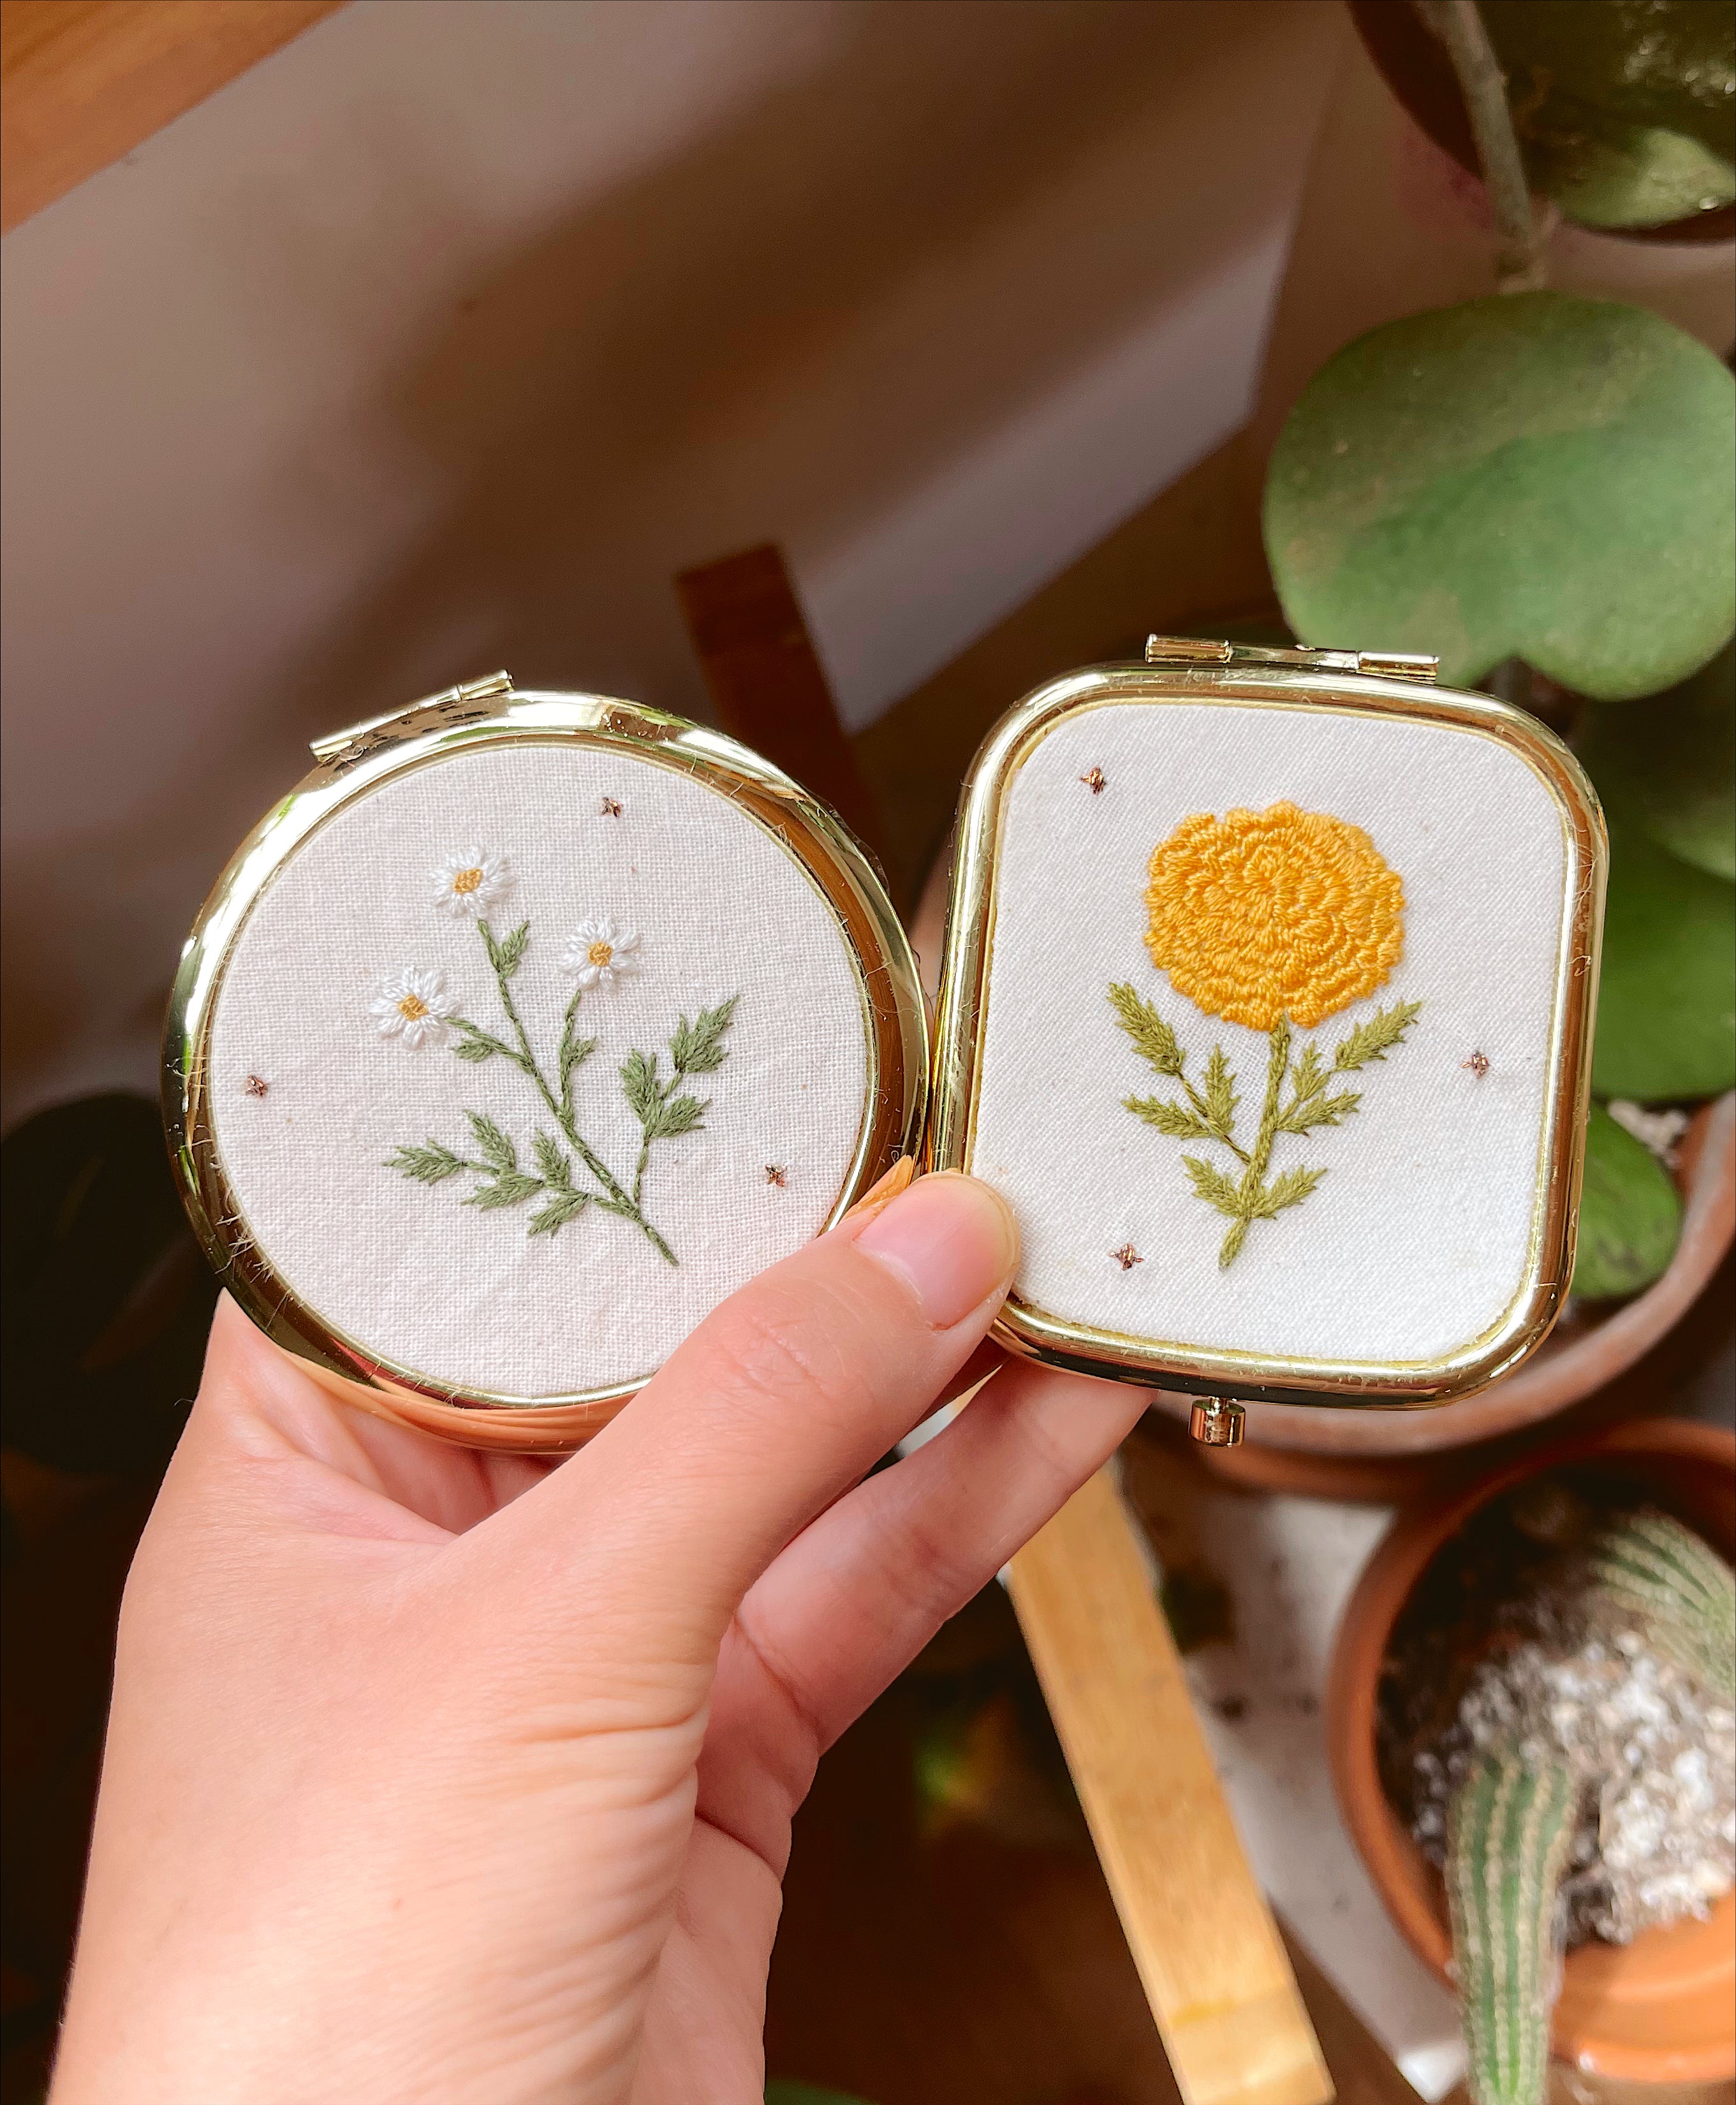 Floral Embroidered Pocket Mirror